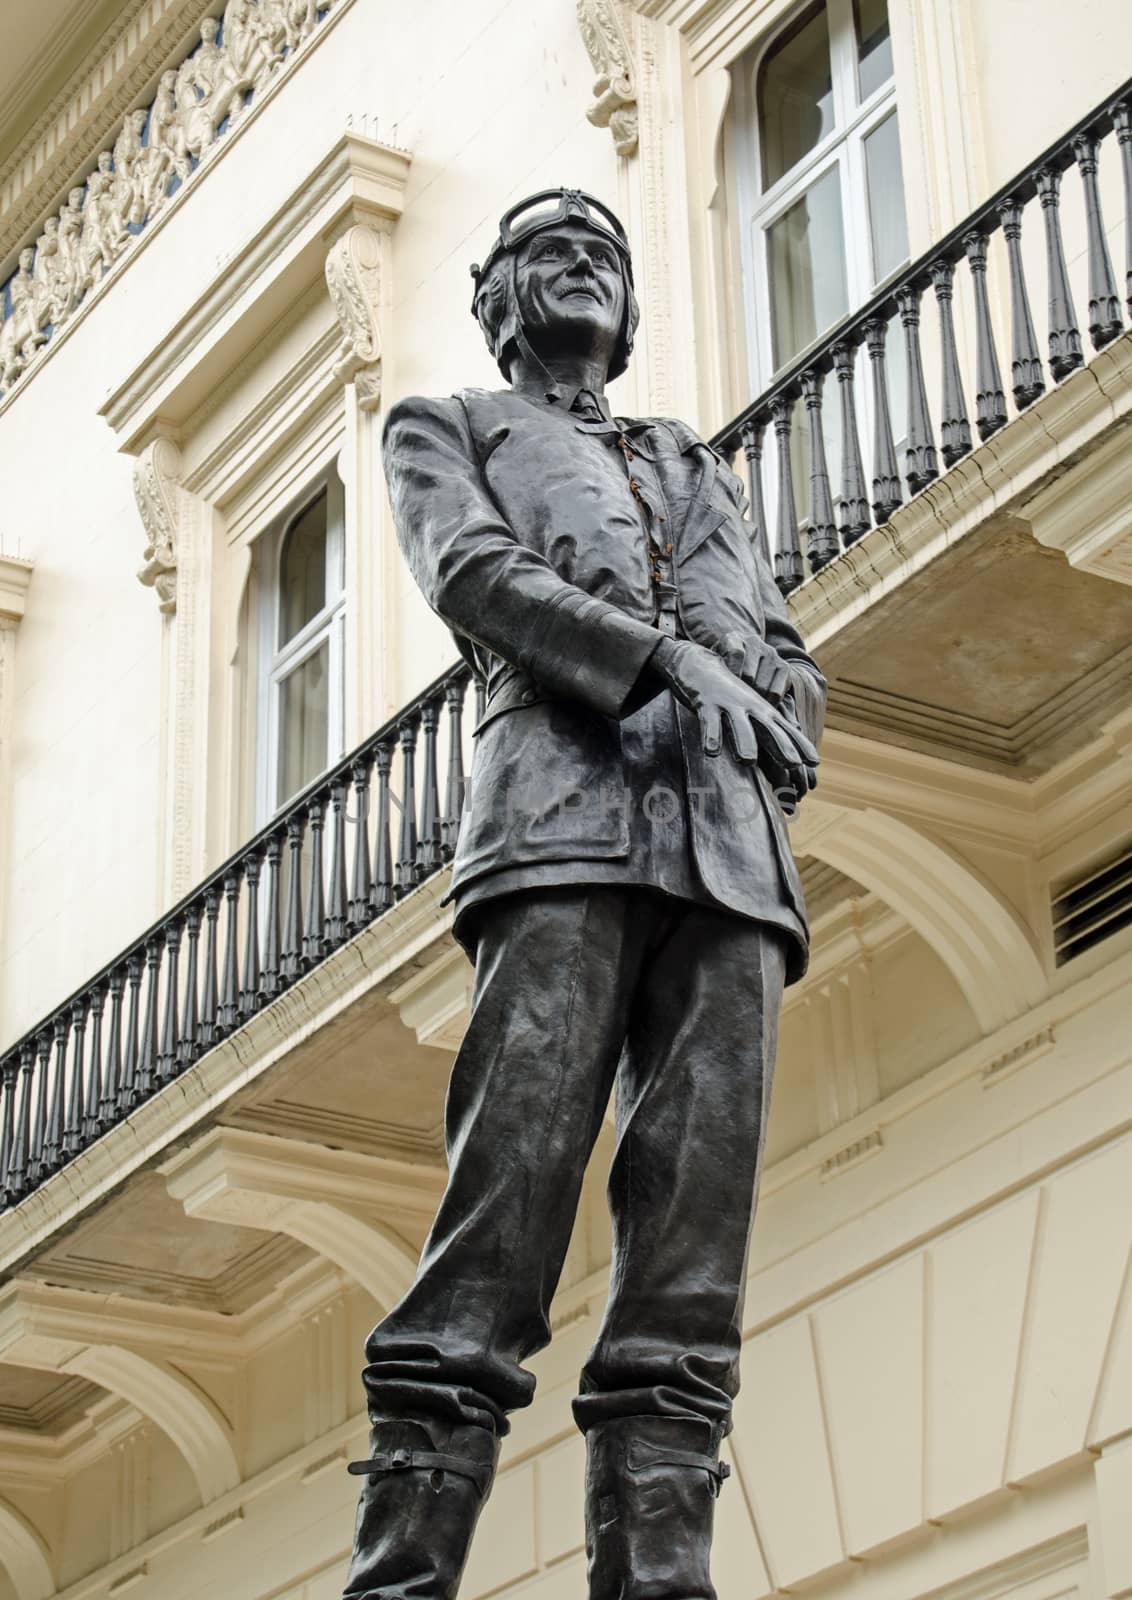 Monument statue to the late Air Chief Marshall Keith Park who led the RAF's Fighter Command during the Battle of Britain in World War II.  Sculpted by Les Johnson the statue is on public display next to the Athenaeum Club in Waterloo Place in the St James's district of London.  